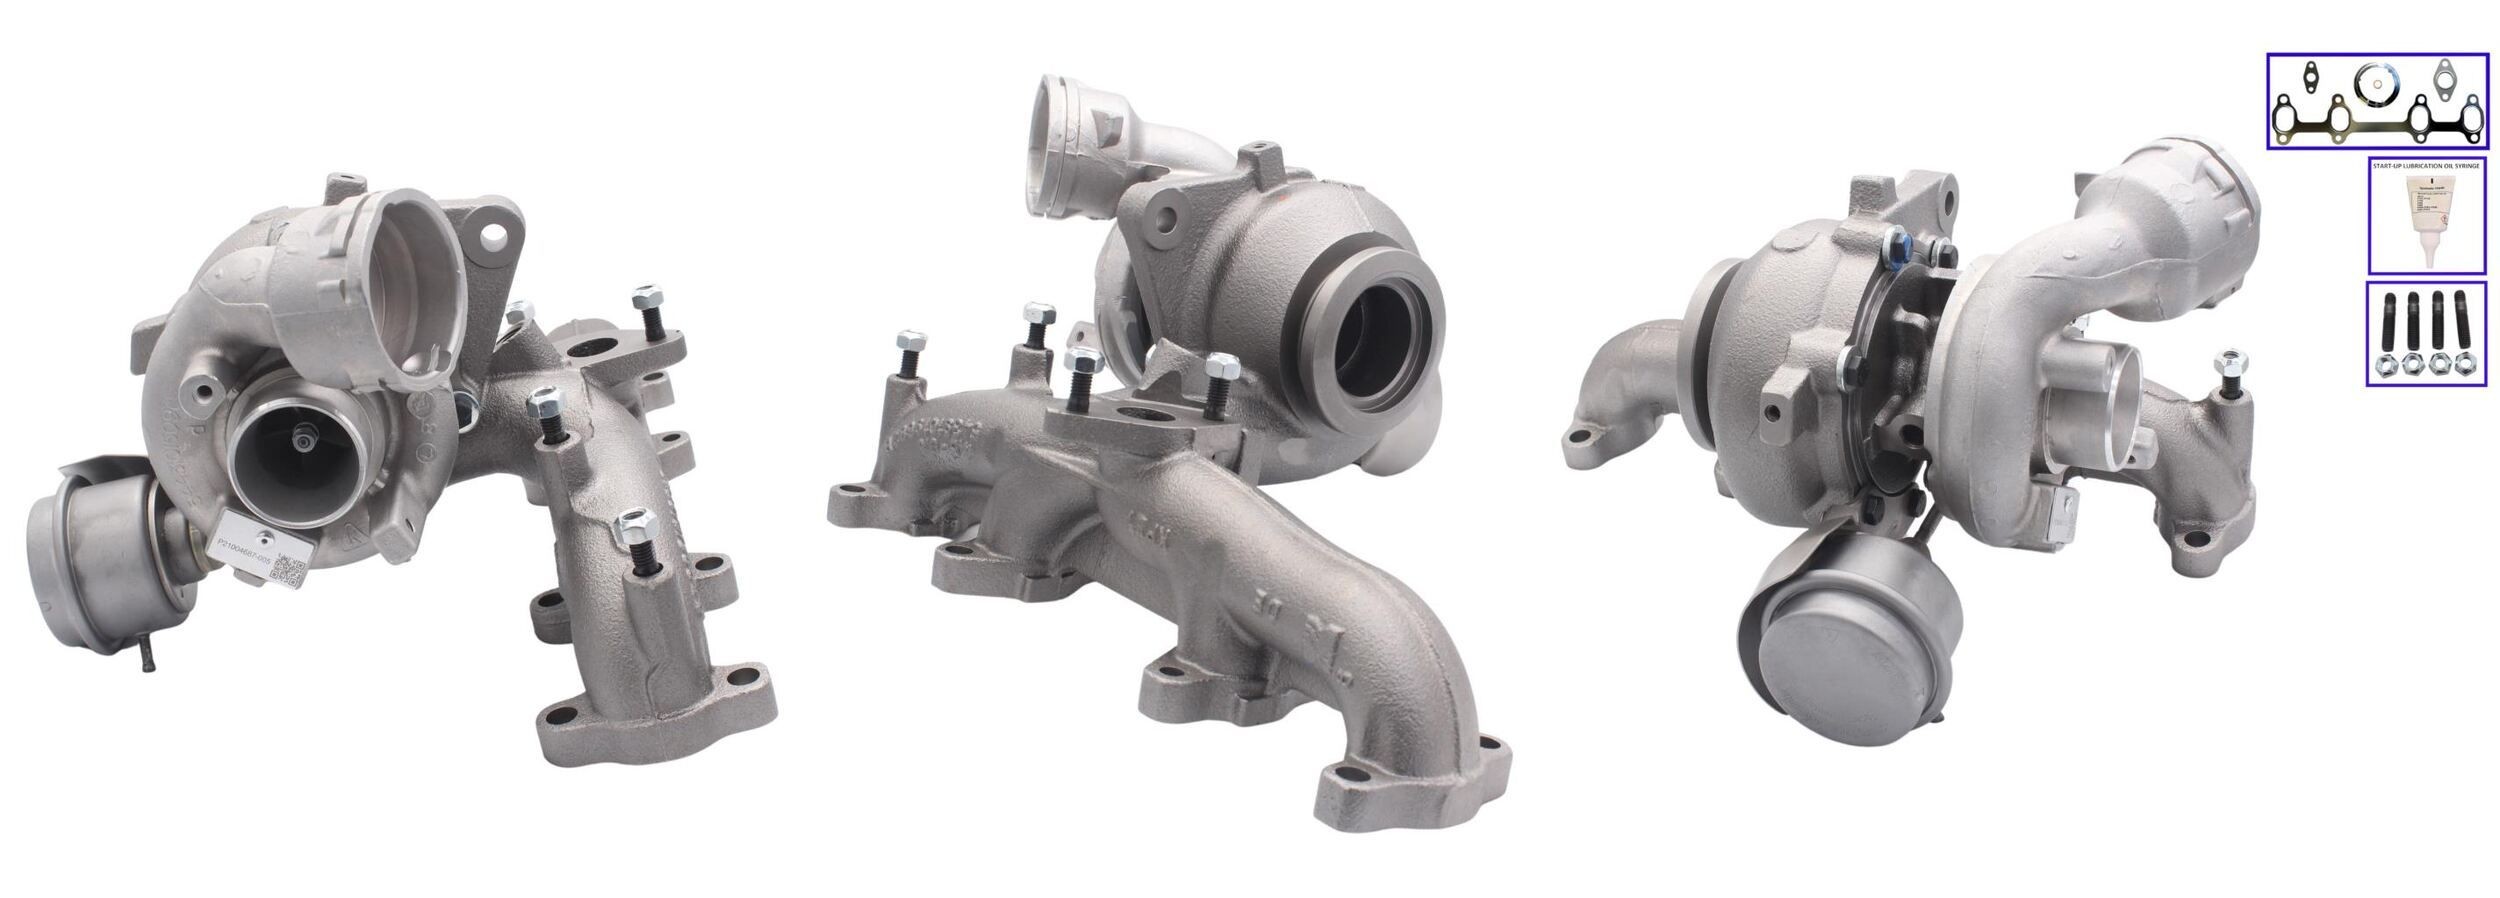 LUCAS LTRPA54399880072 Turbocharger Exhaust Turbocharger, Pneumatically controlled actuator, with gaskets/seals